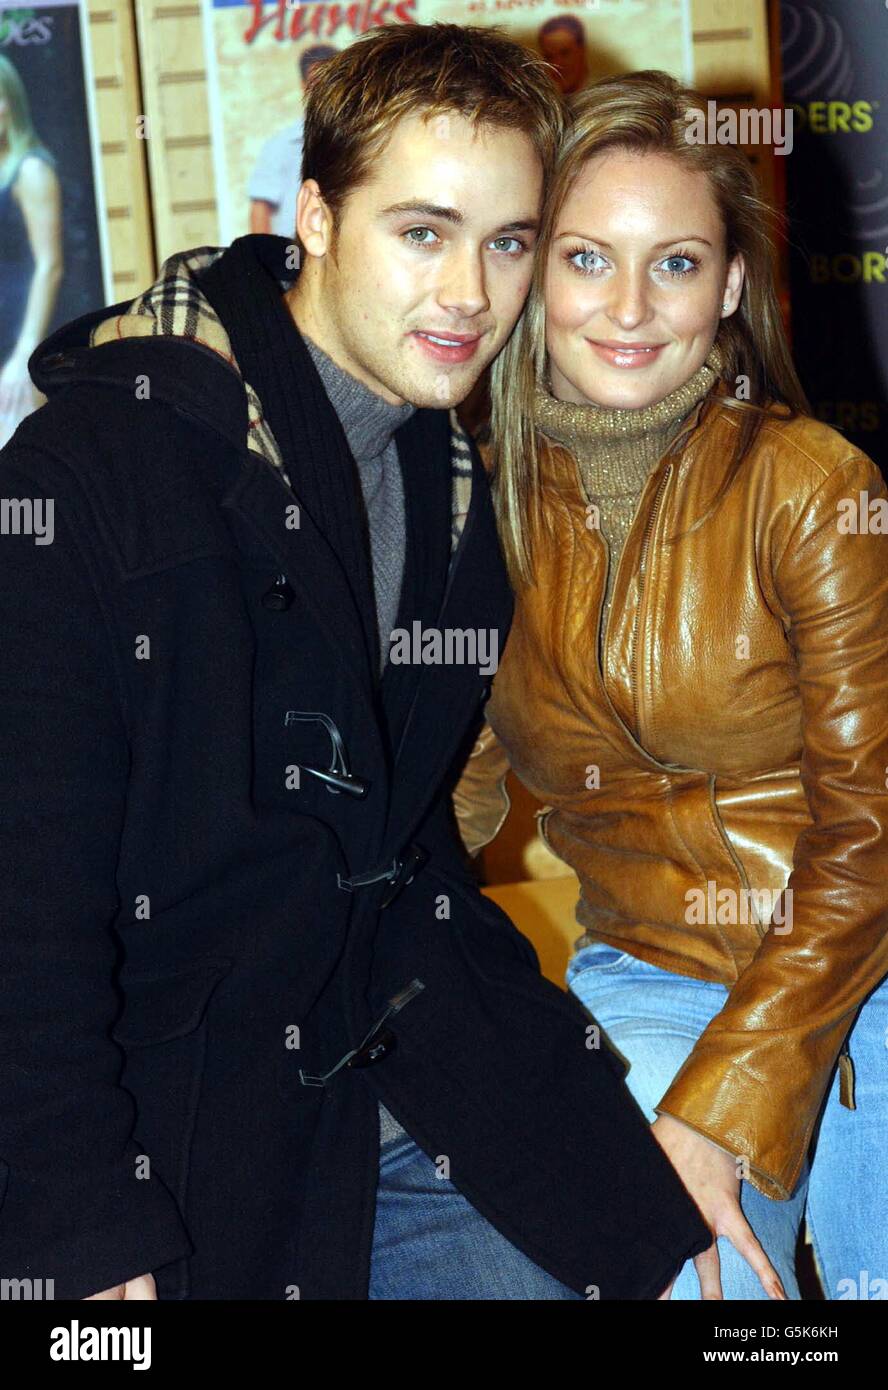 Actors Marcus Patrick and Joanna Taylor during the launch of the official 2002 calendar for the Channel Four soap Hollyoaks, at Borders Books in London's Oxford Street. Stock Photo